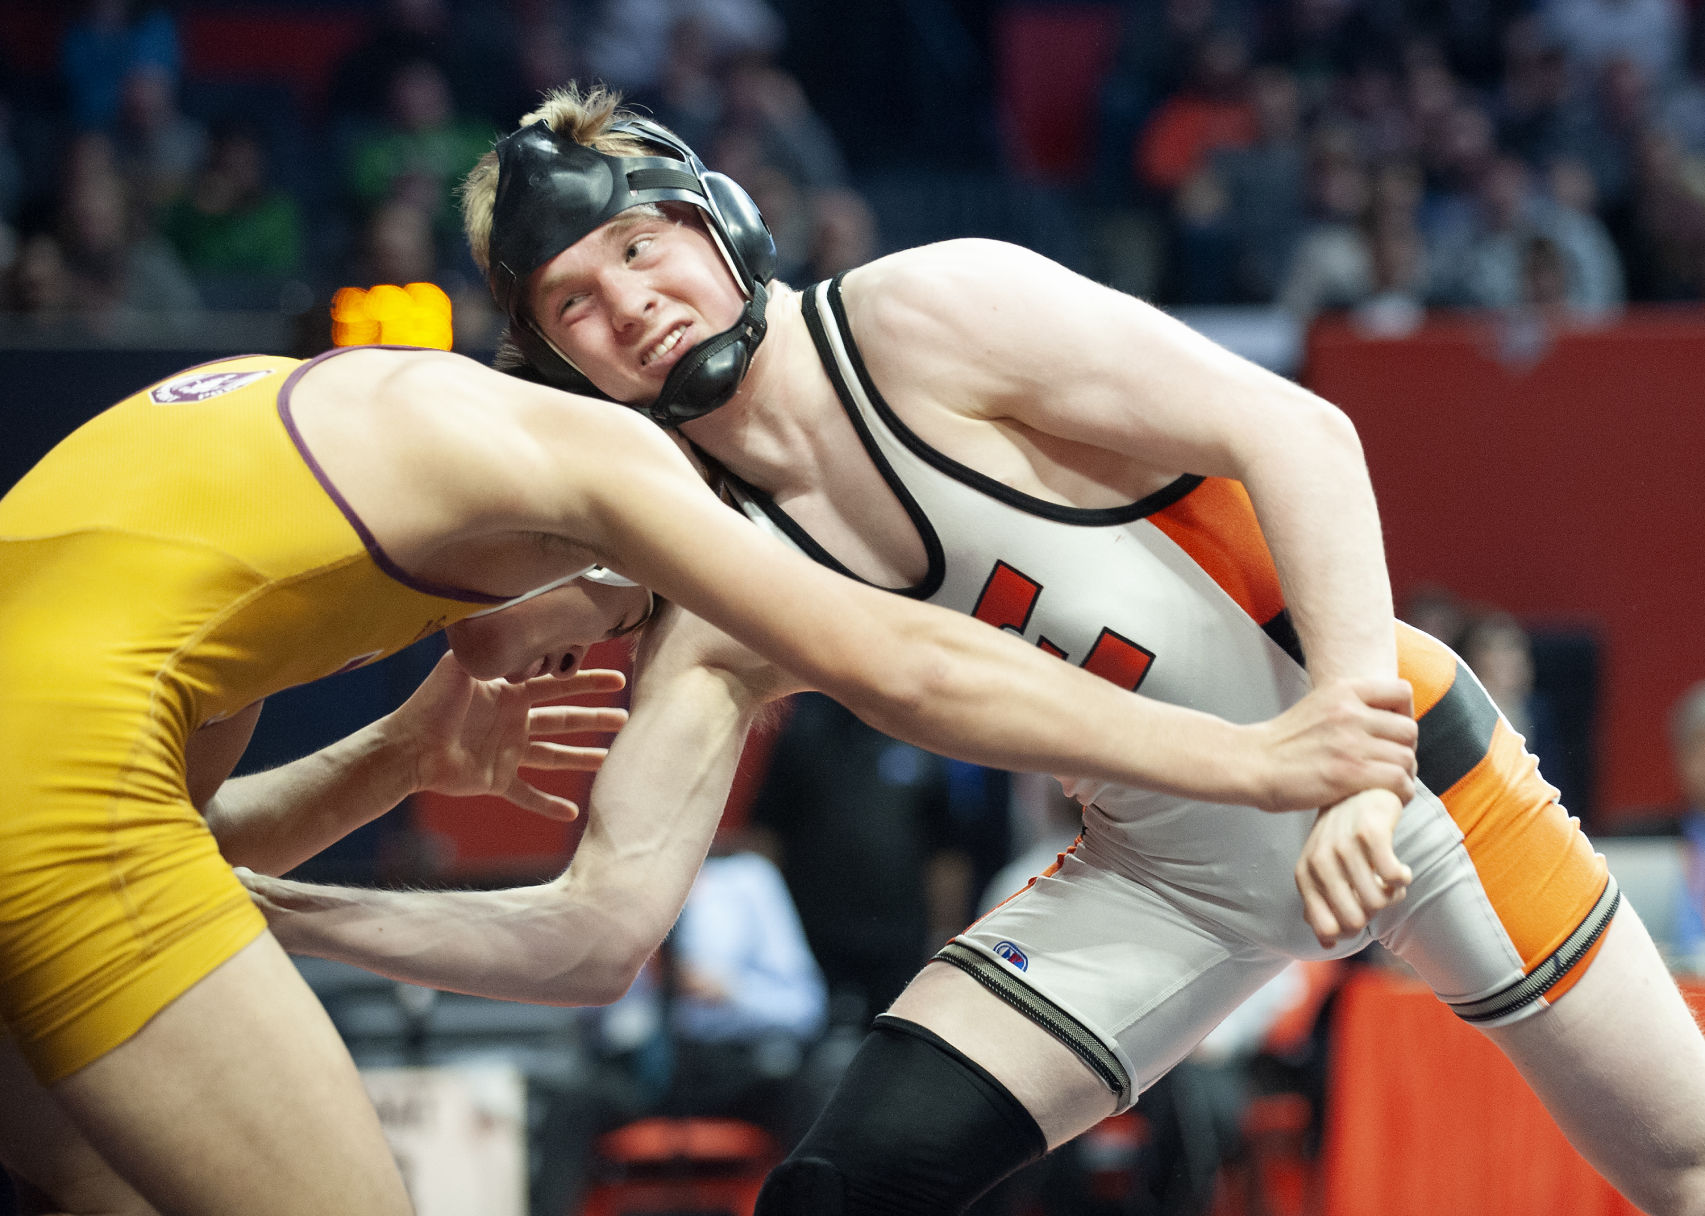 Edwardsville, Triad take aim on advancing past dual sectionals picture